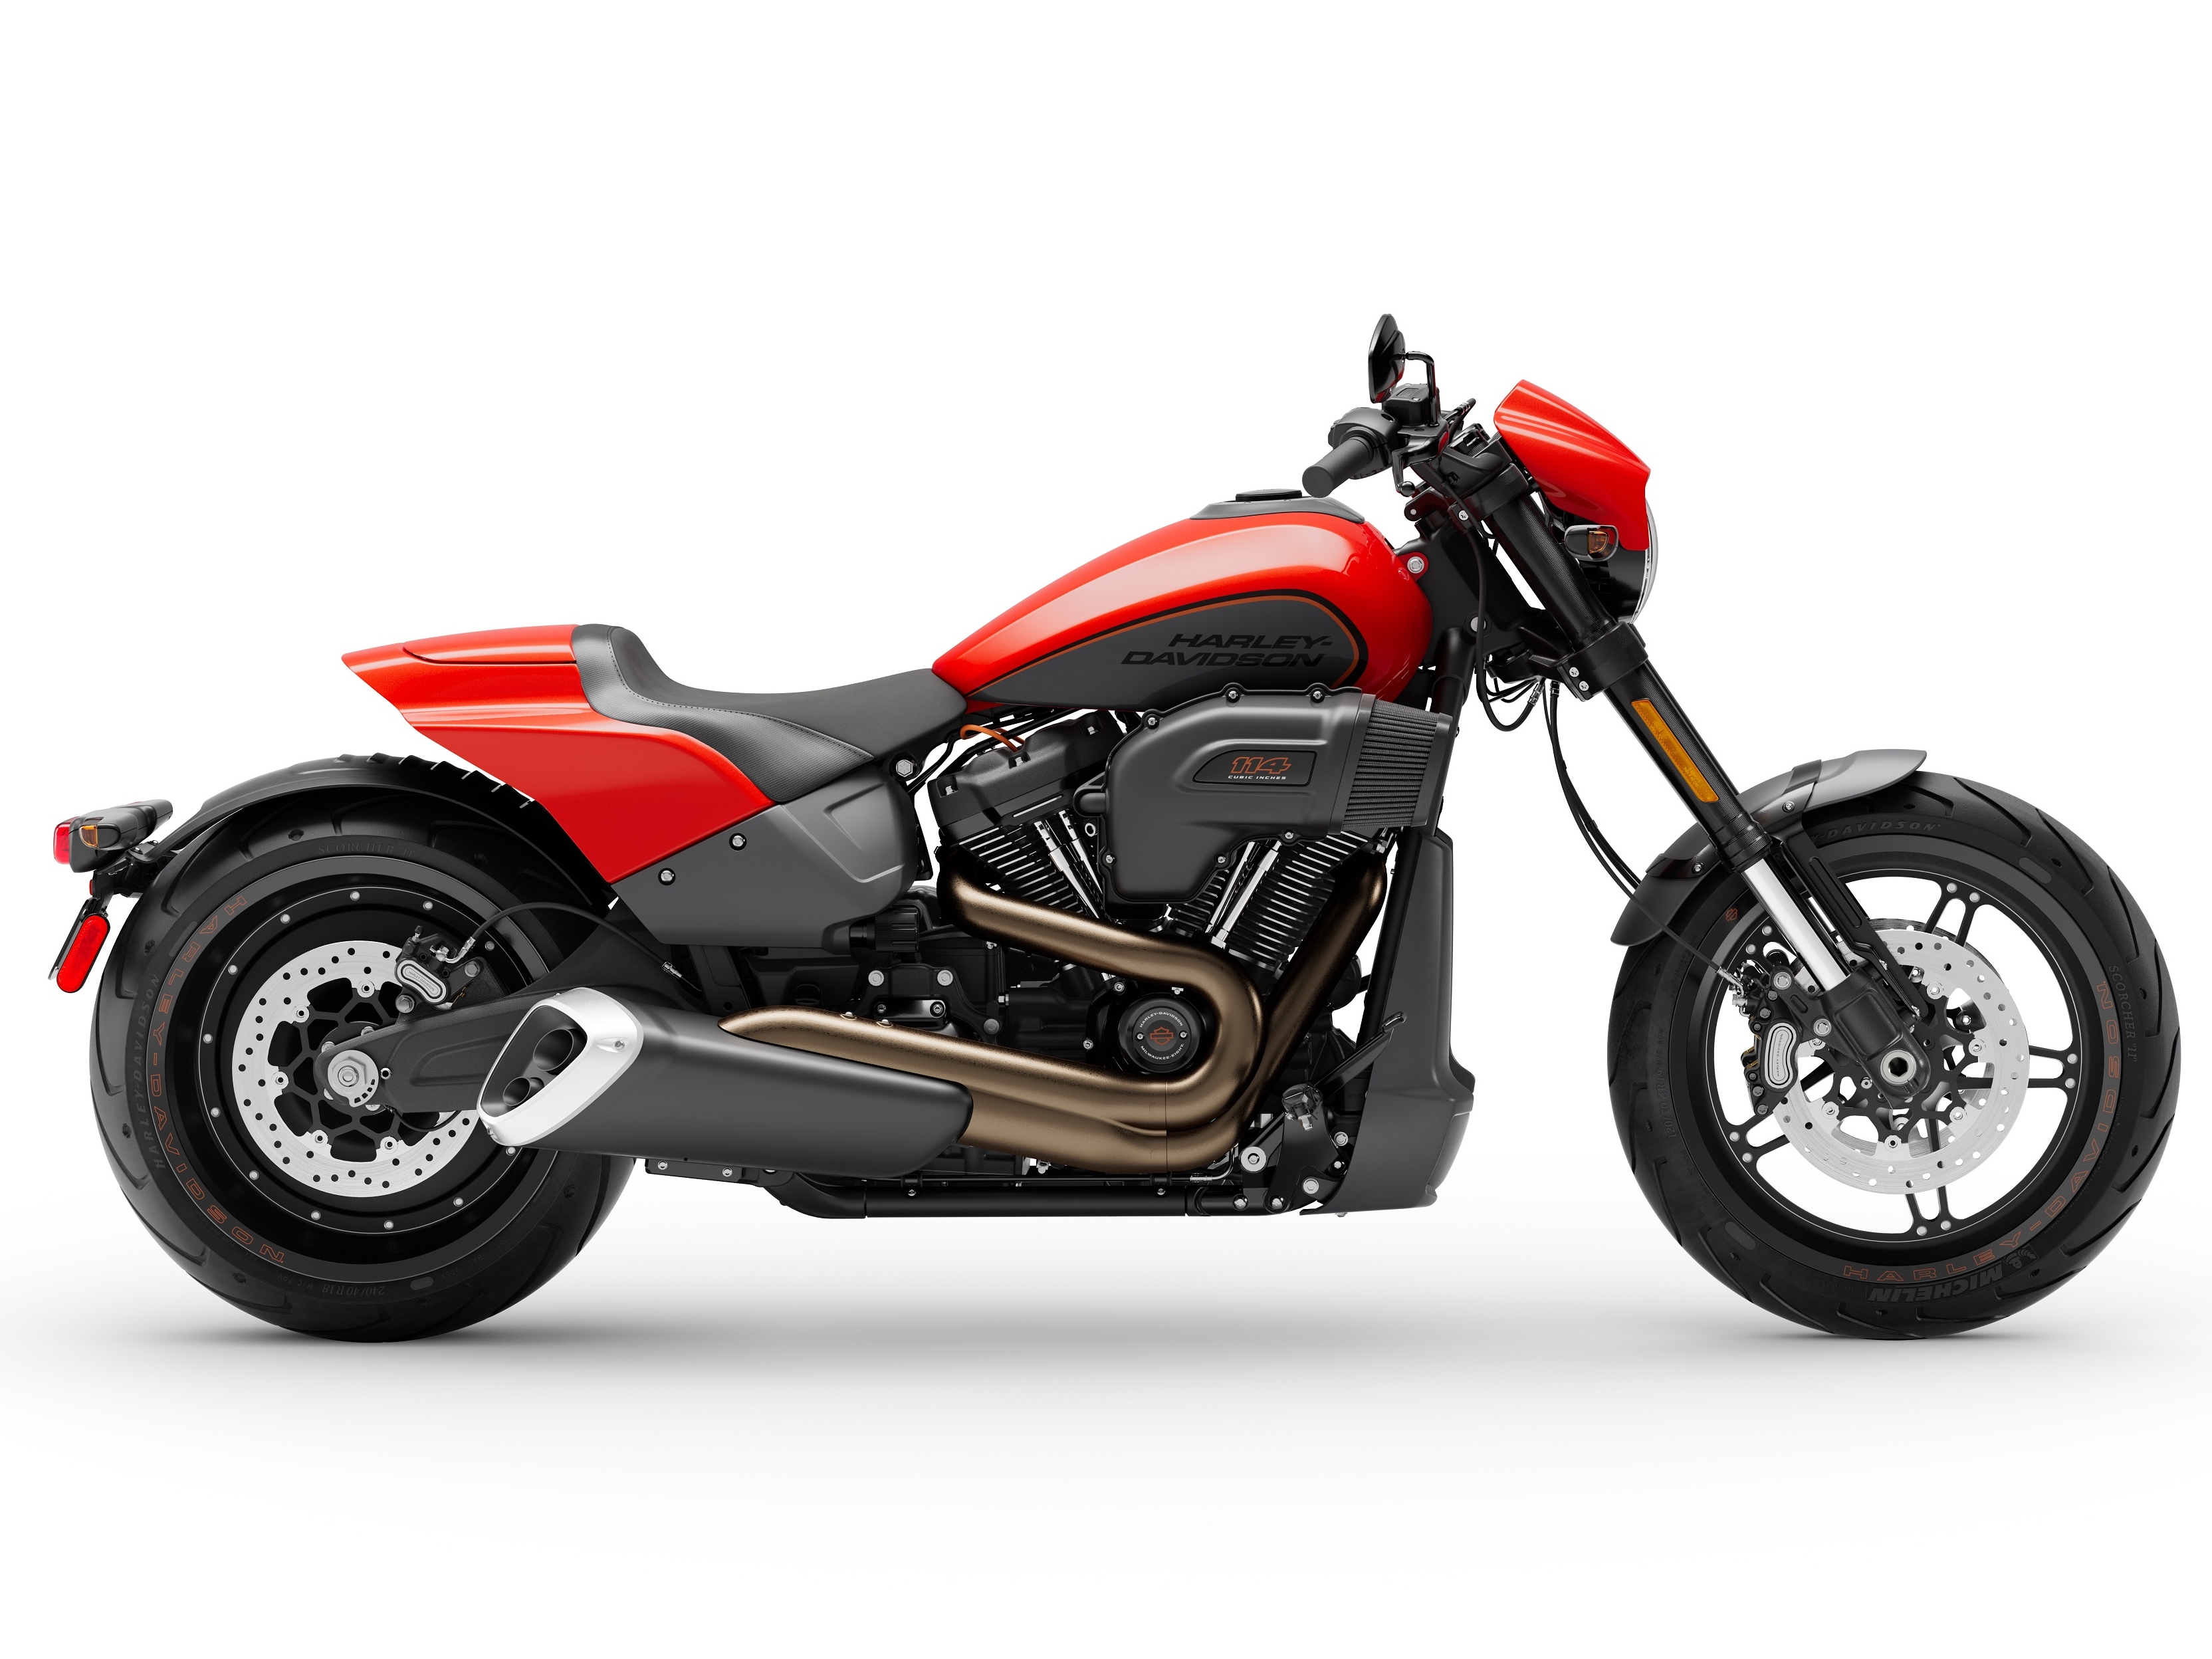 2020 Harley-Davidson FXDR 114 Buyer's Guide: Specs, Photos, Price  Cycle  World